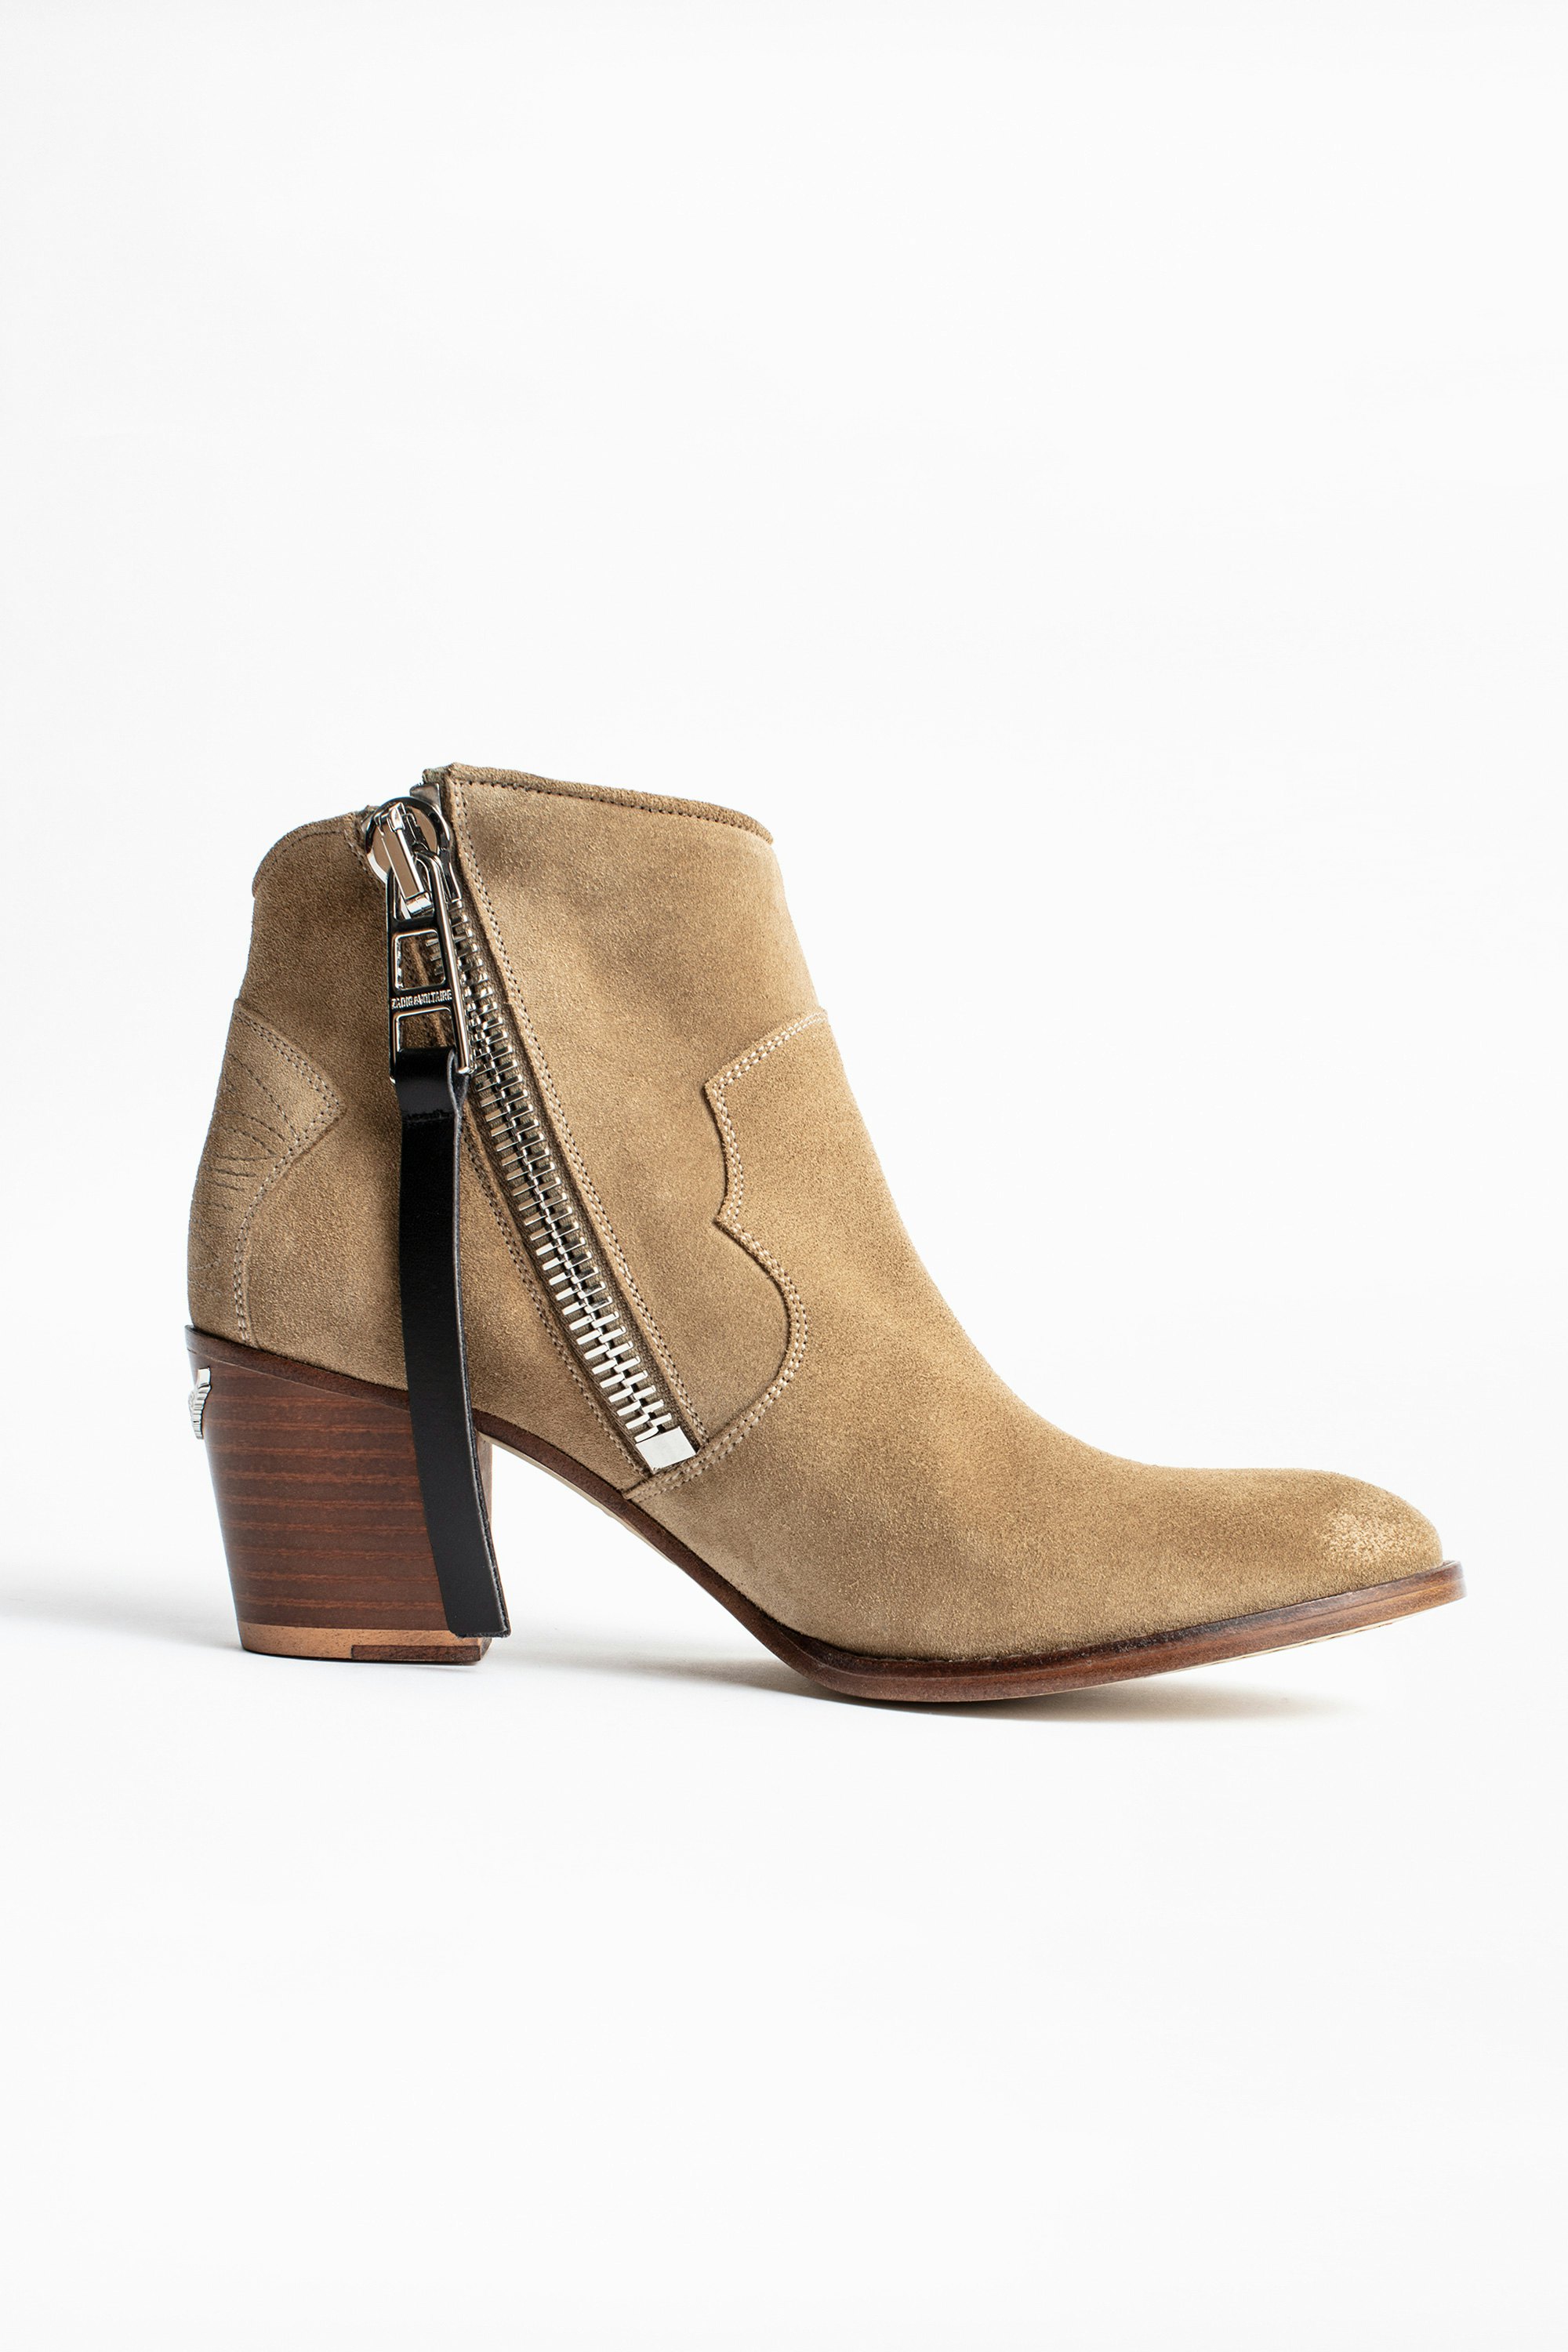 Molly Suede Zip Ankle Boots - Women’s heeled ankle boots in suede leather.